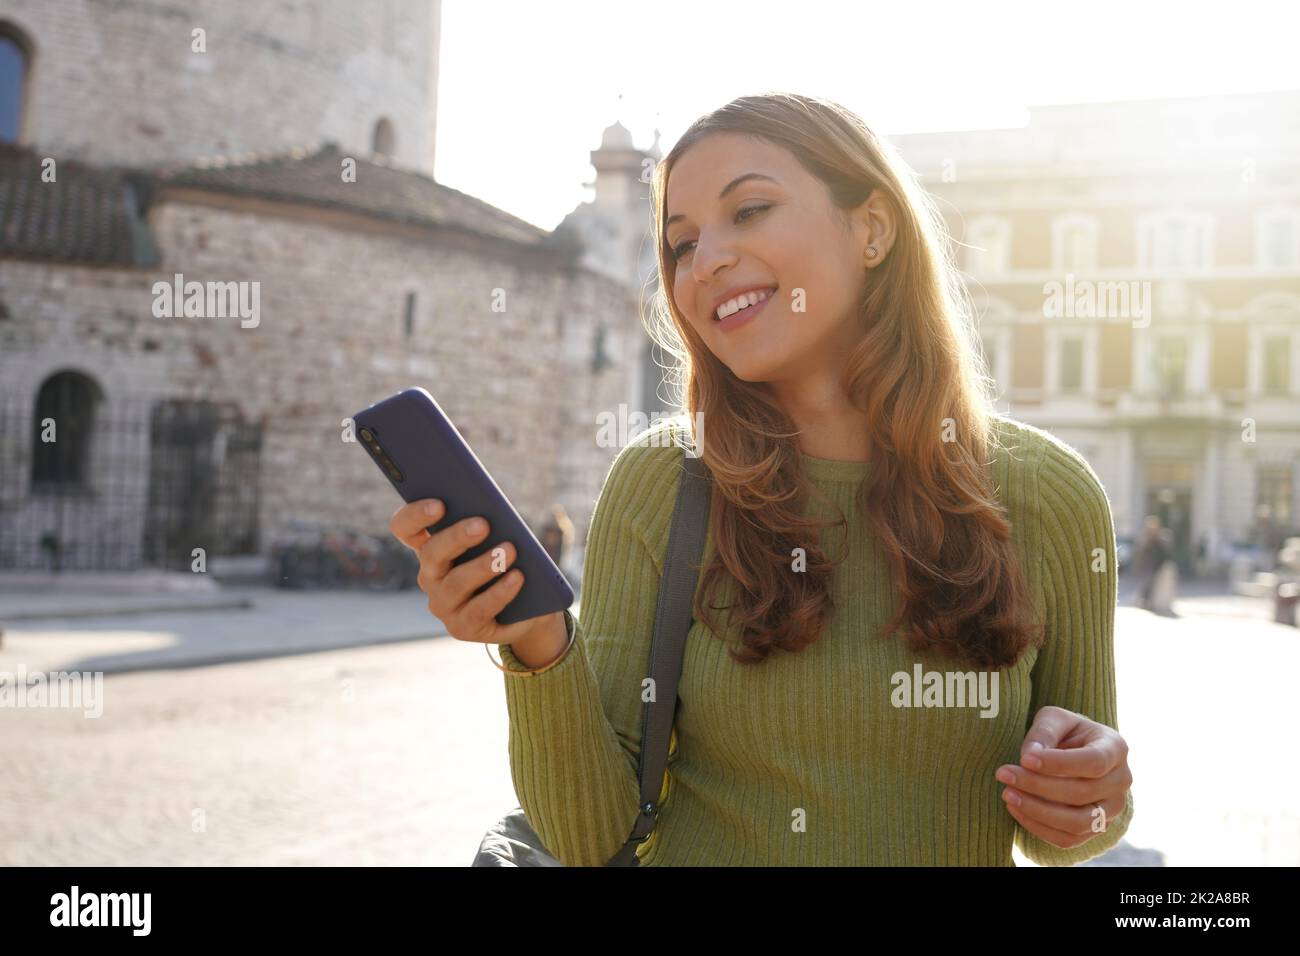 Attractive young woman walking messaging with phone in Brescia, Italy Stock Photo